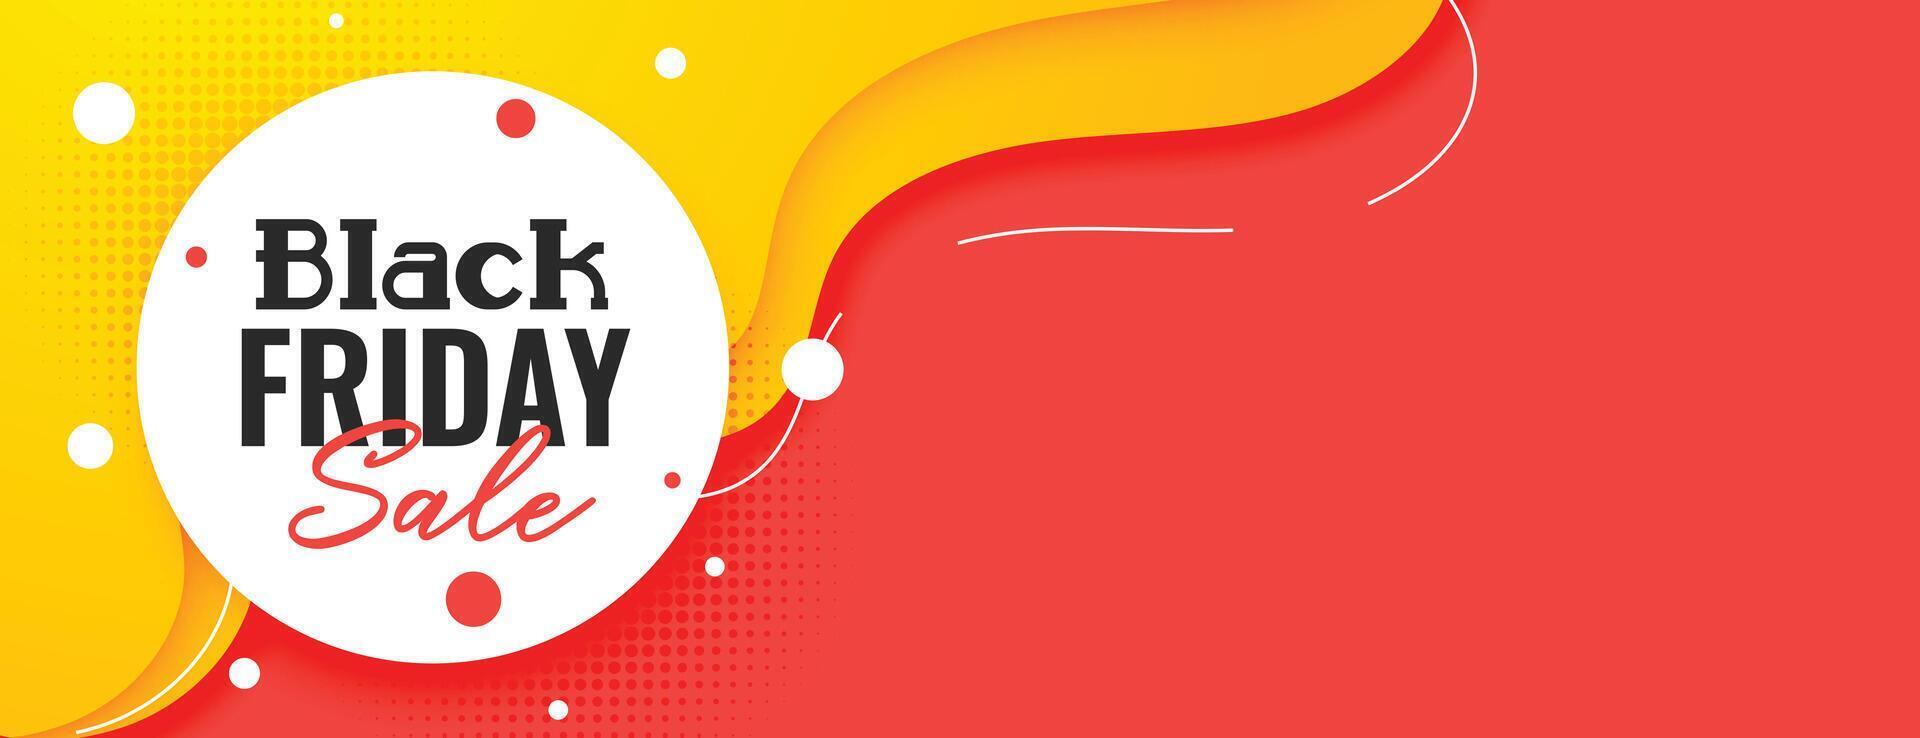 stylish yellow and red black friday sale memphis style banner vector